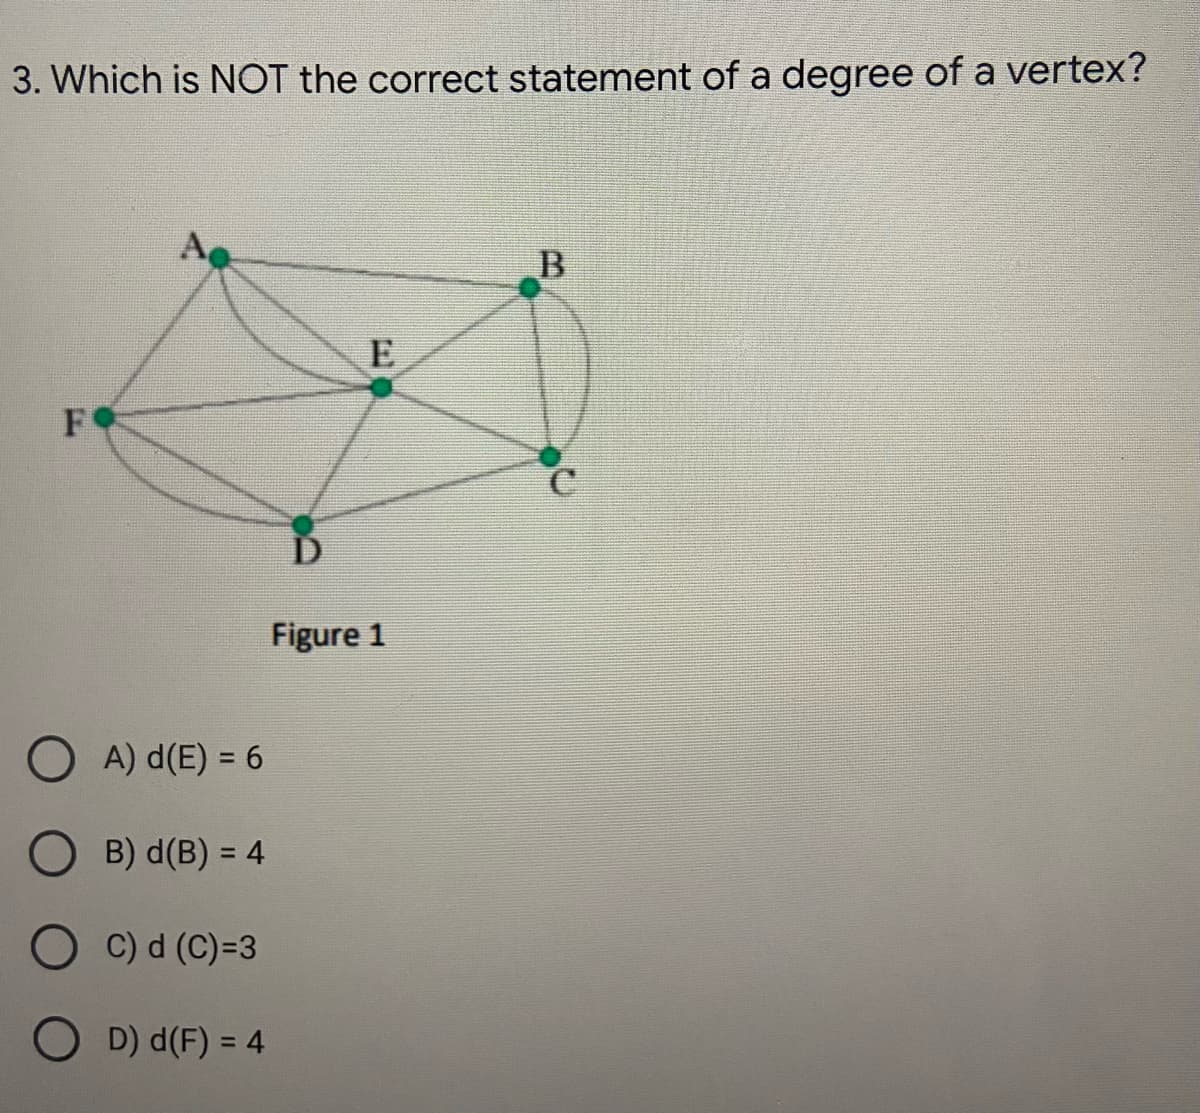 3. Which is NOT the correct statement of a degree of a vertex?
D
Figure 1
O A) d(E) = 6
B) d(B) = 4
O C) d (C)=3
O D) d(F) = 4
